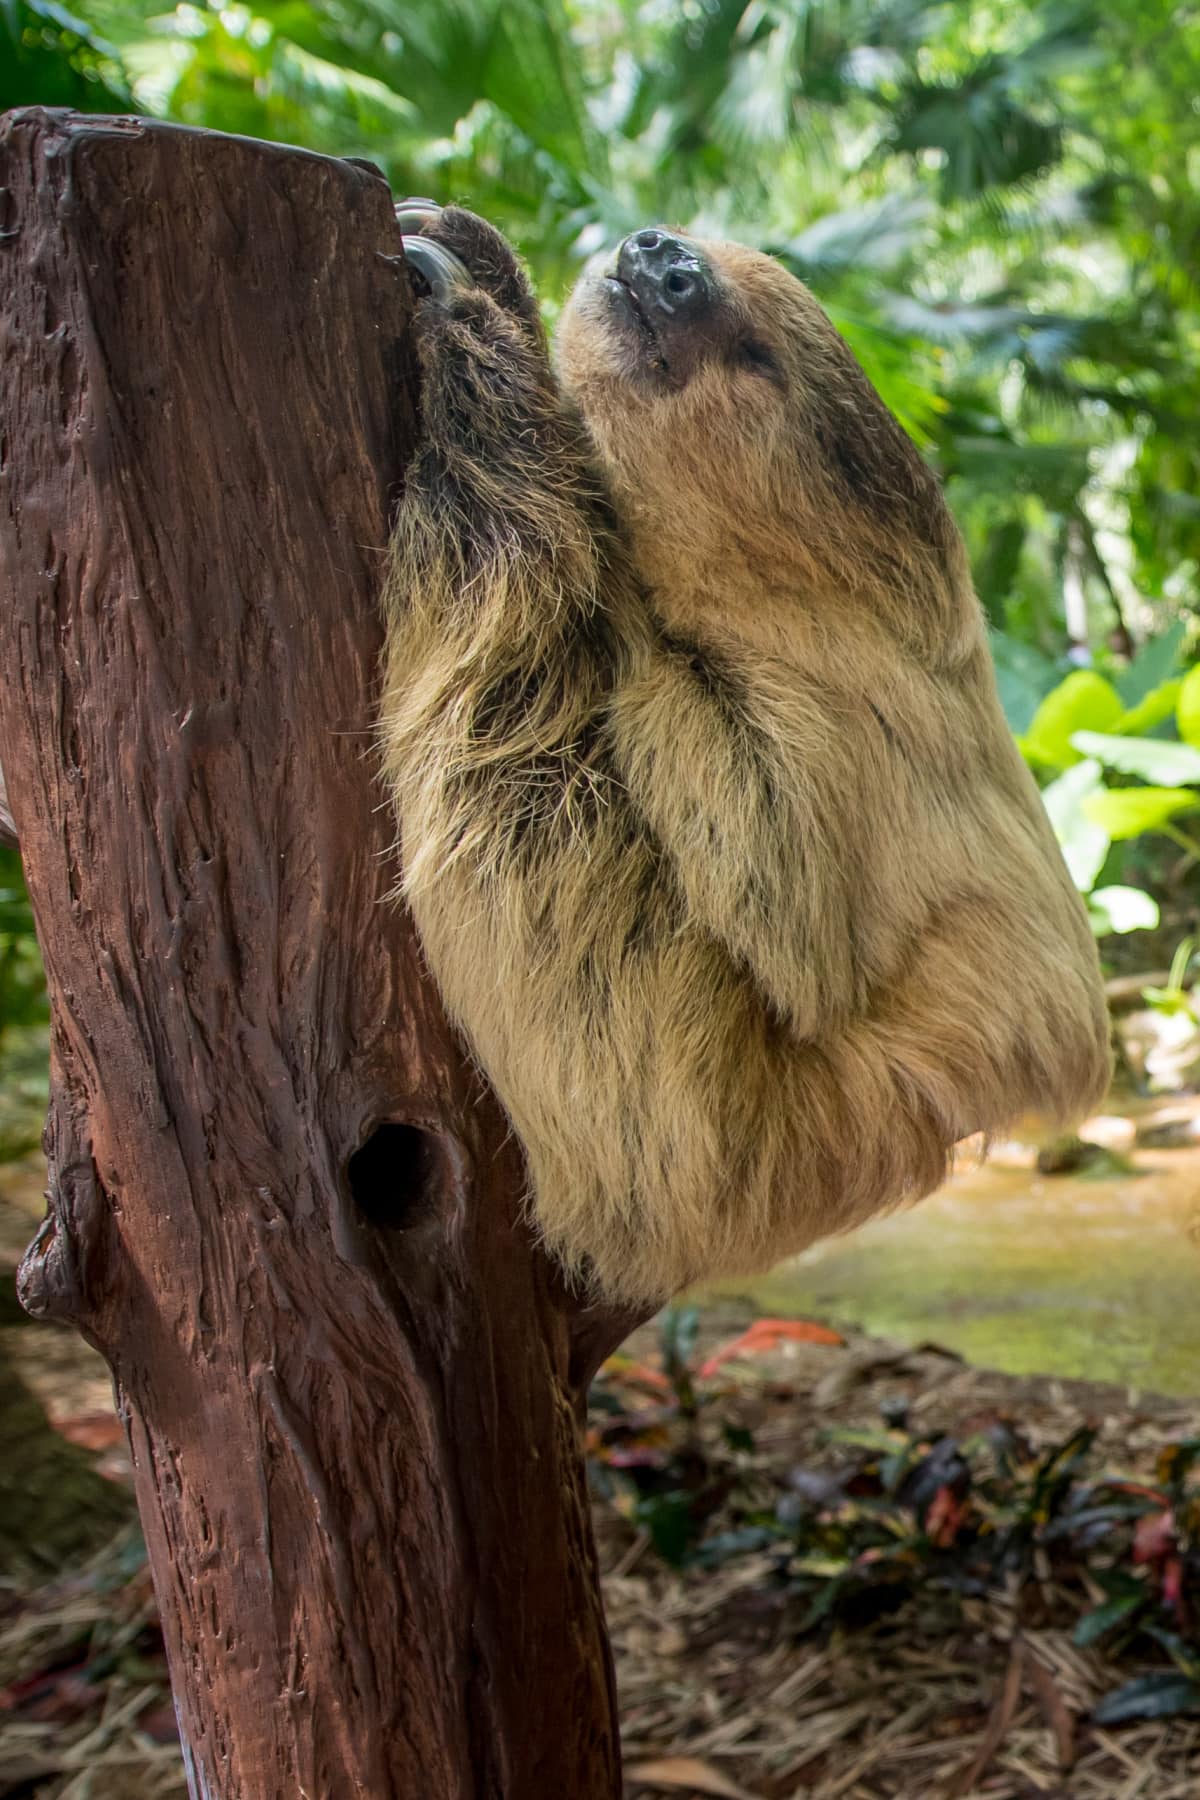 Sloth resting in a tree